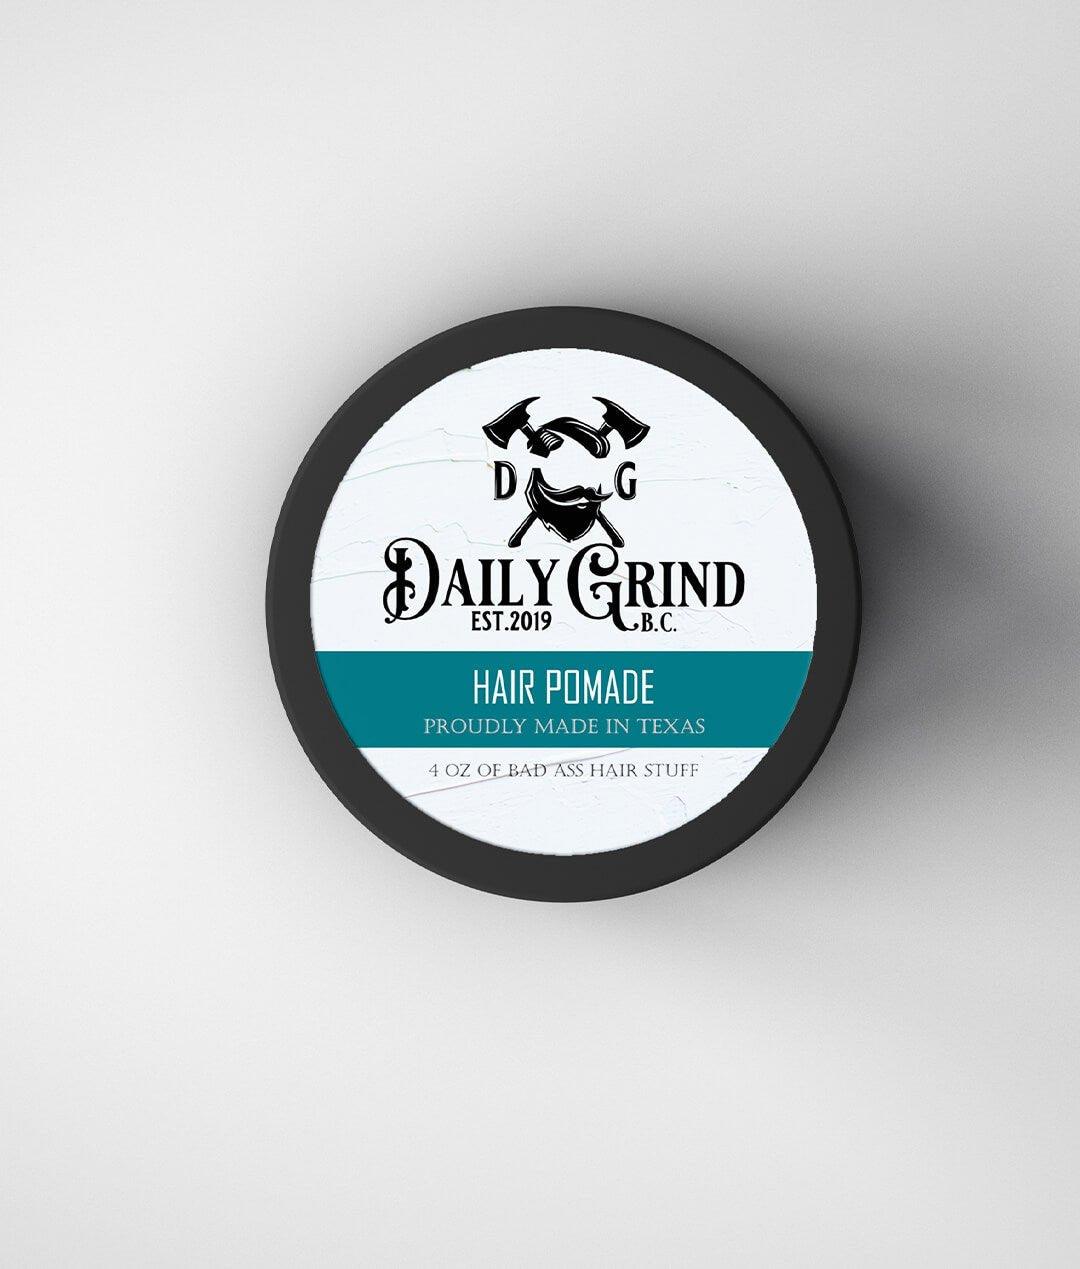 Hair Pomade - Hair Products for Men - Daily Grind